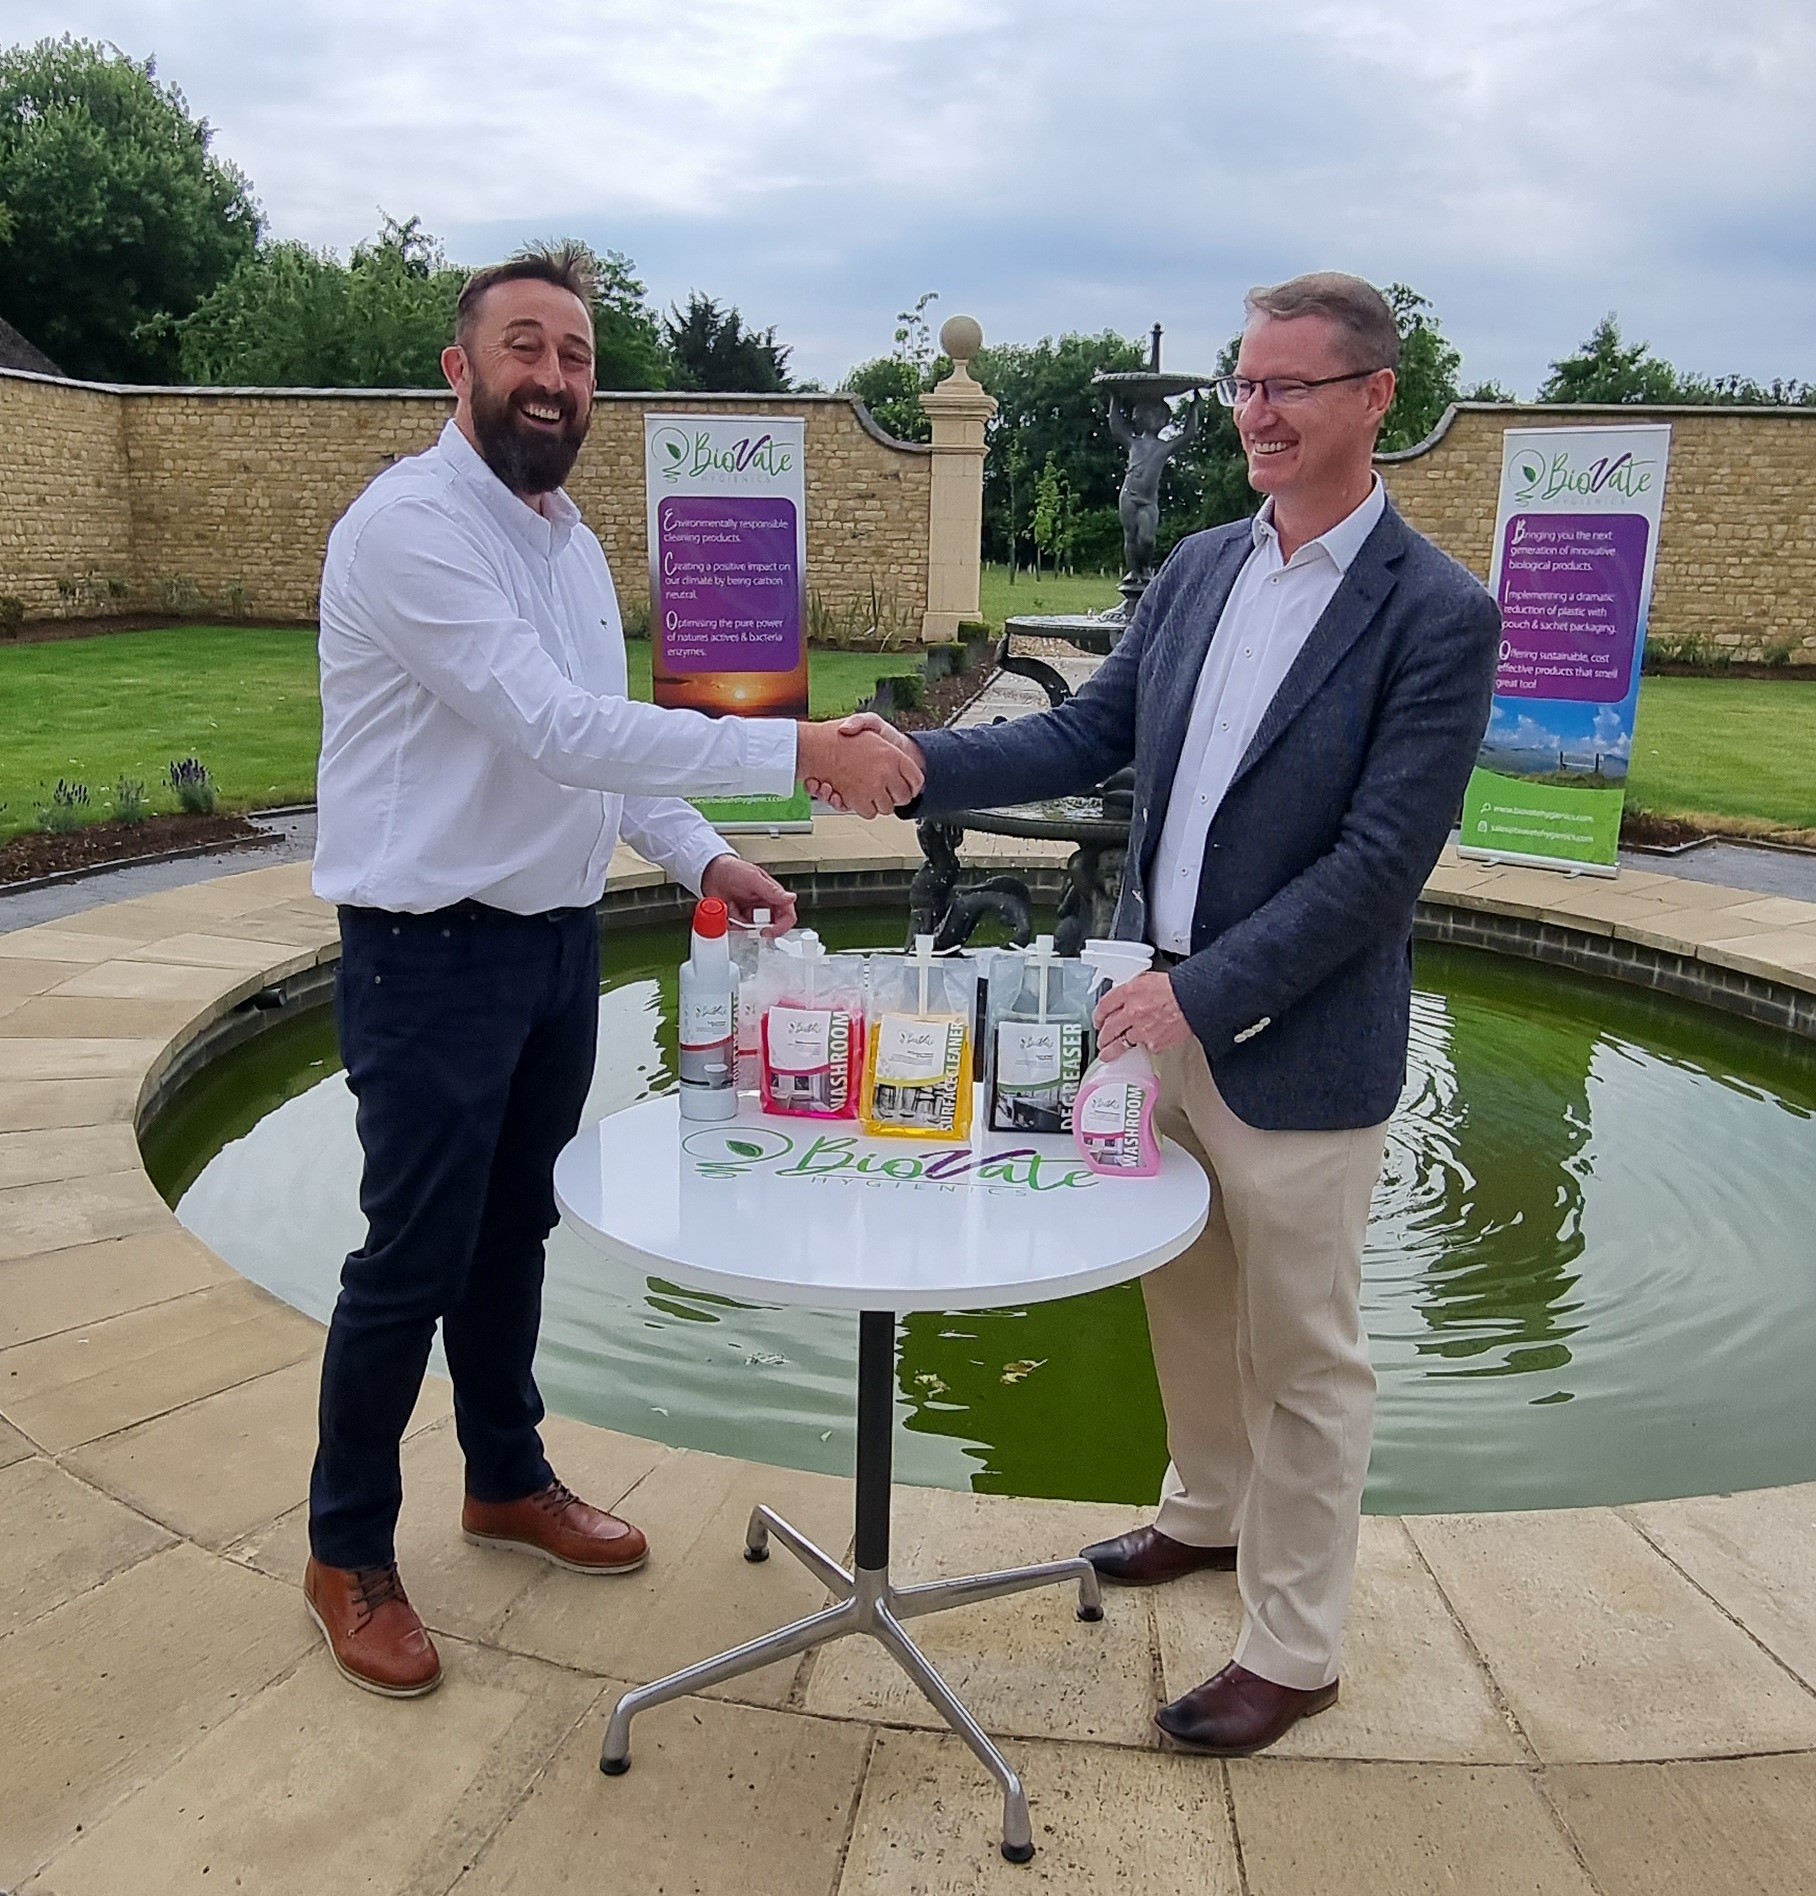 Biovate launches new catering ranges with Bidfood